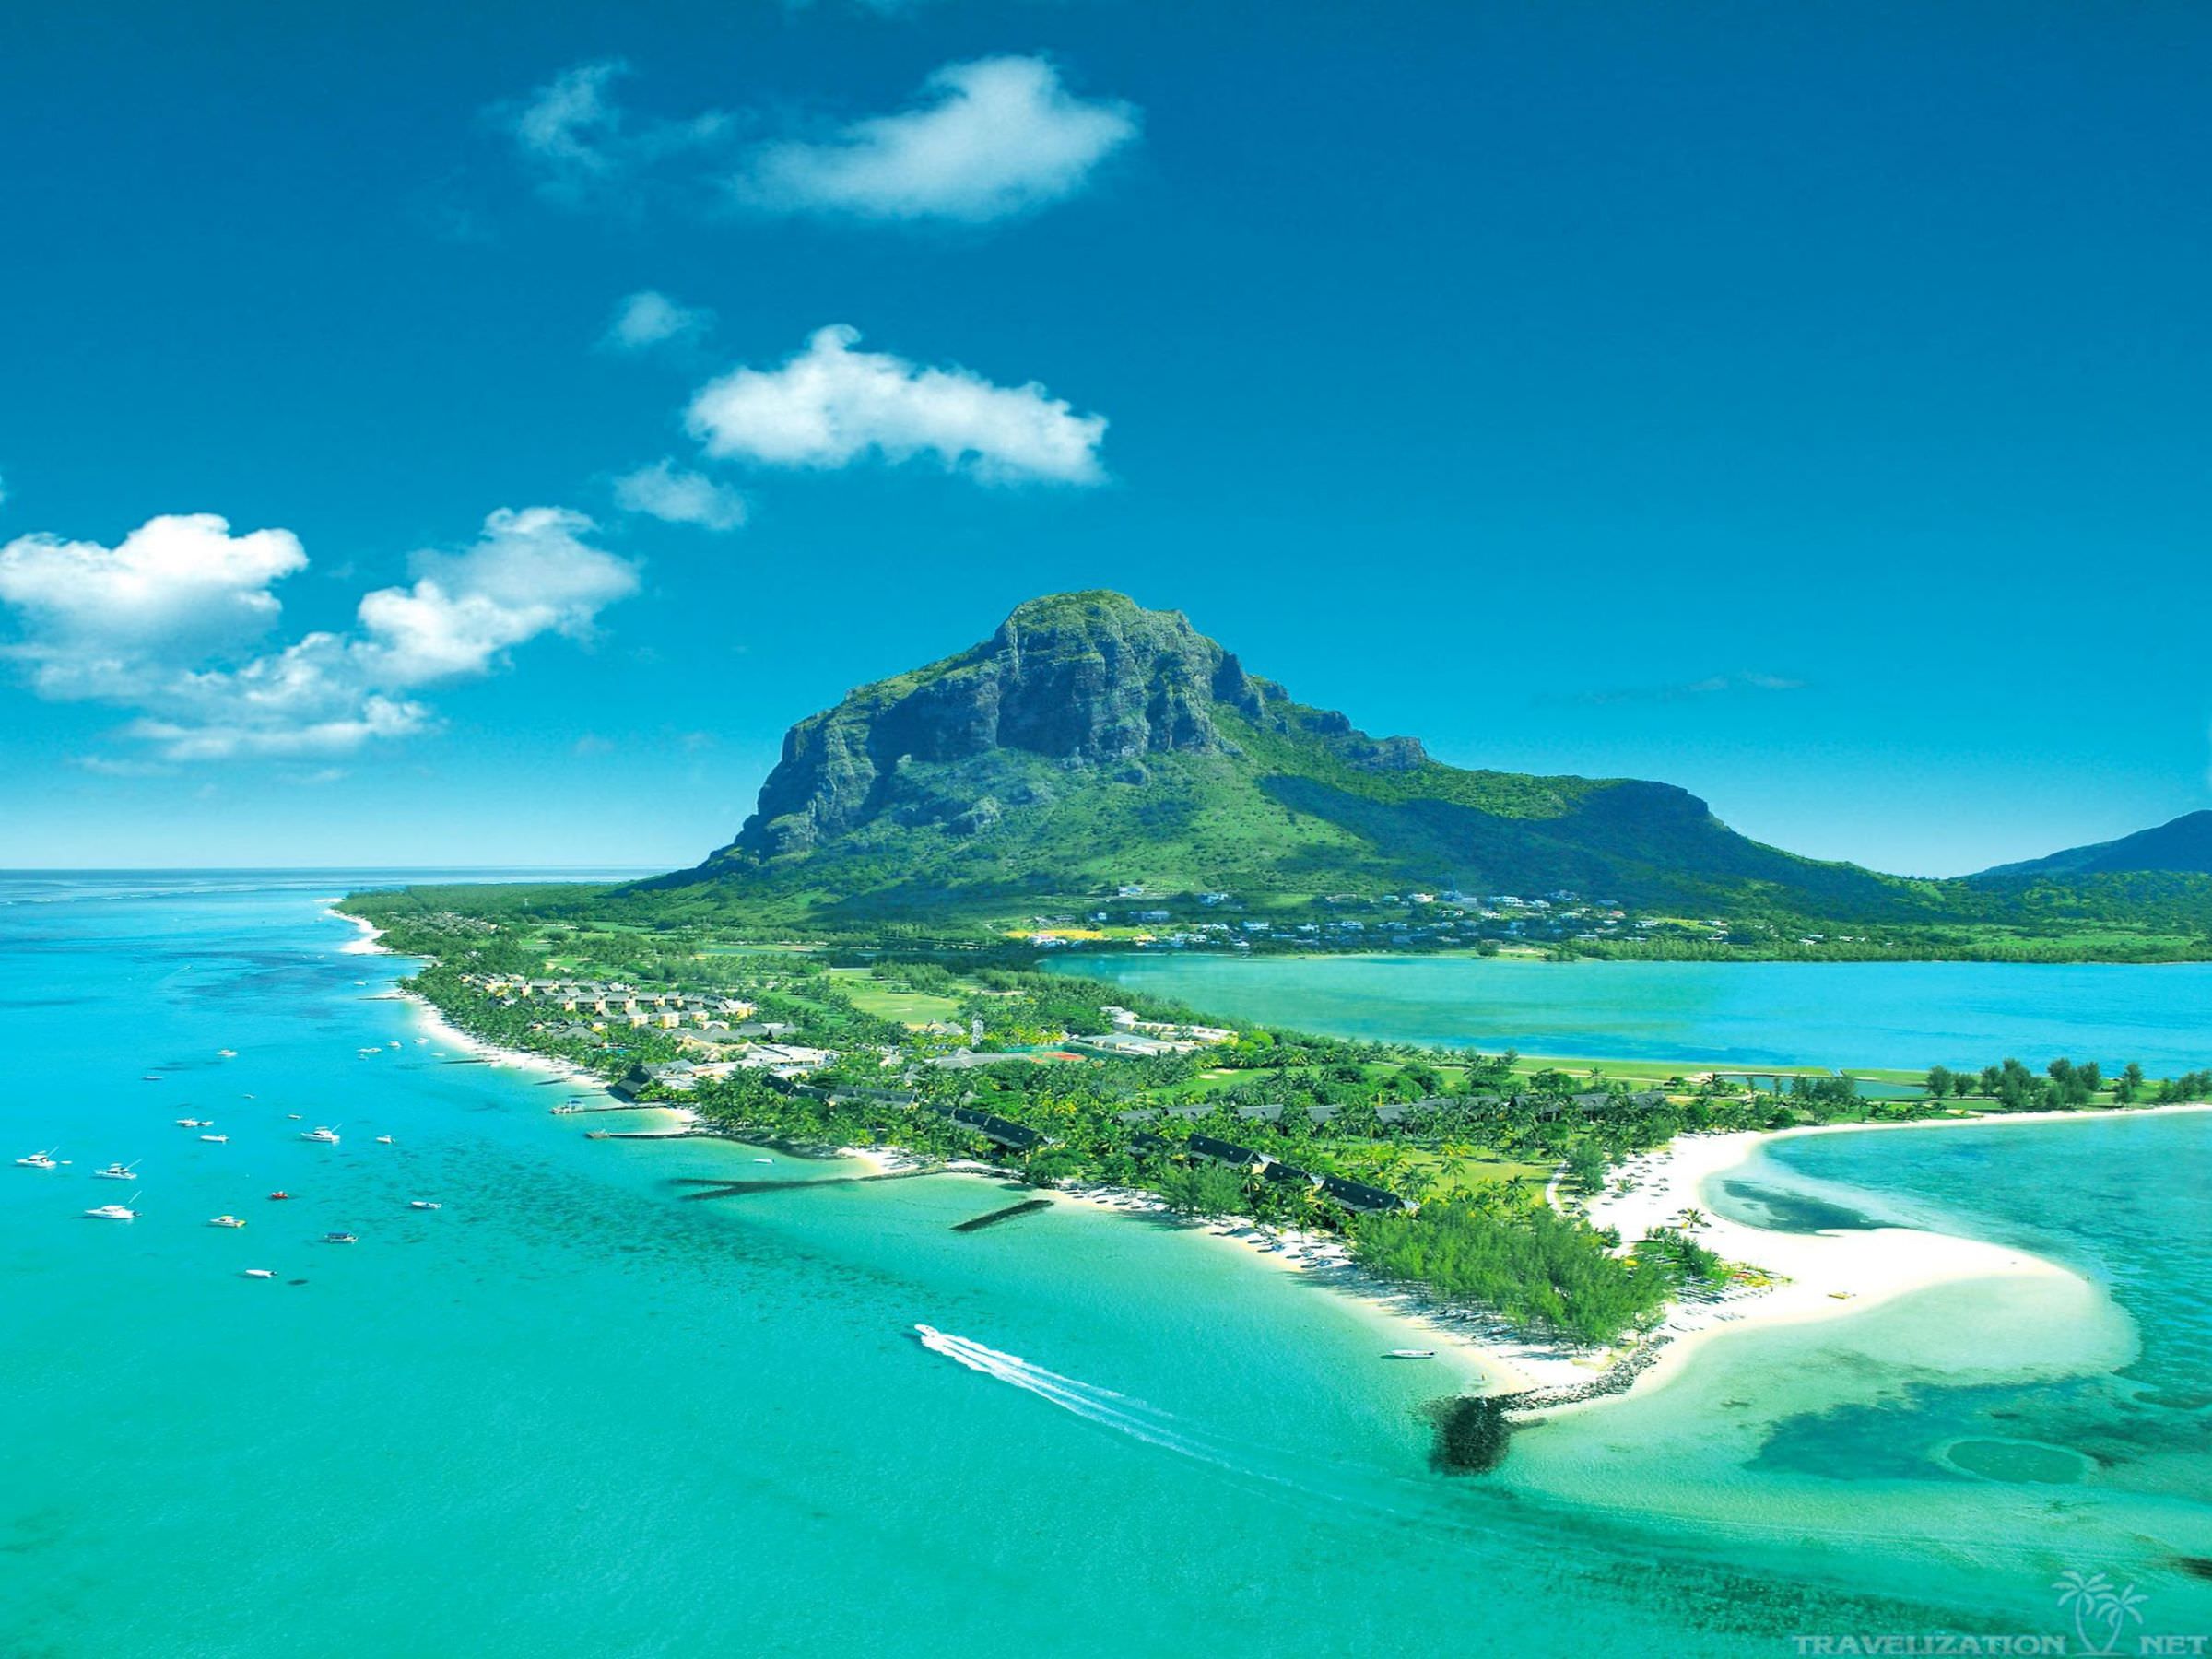 A fun-filled 6D/5N holiday tour package to explore Mauritius